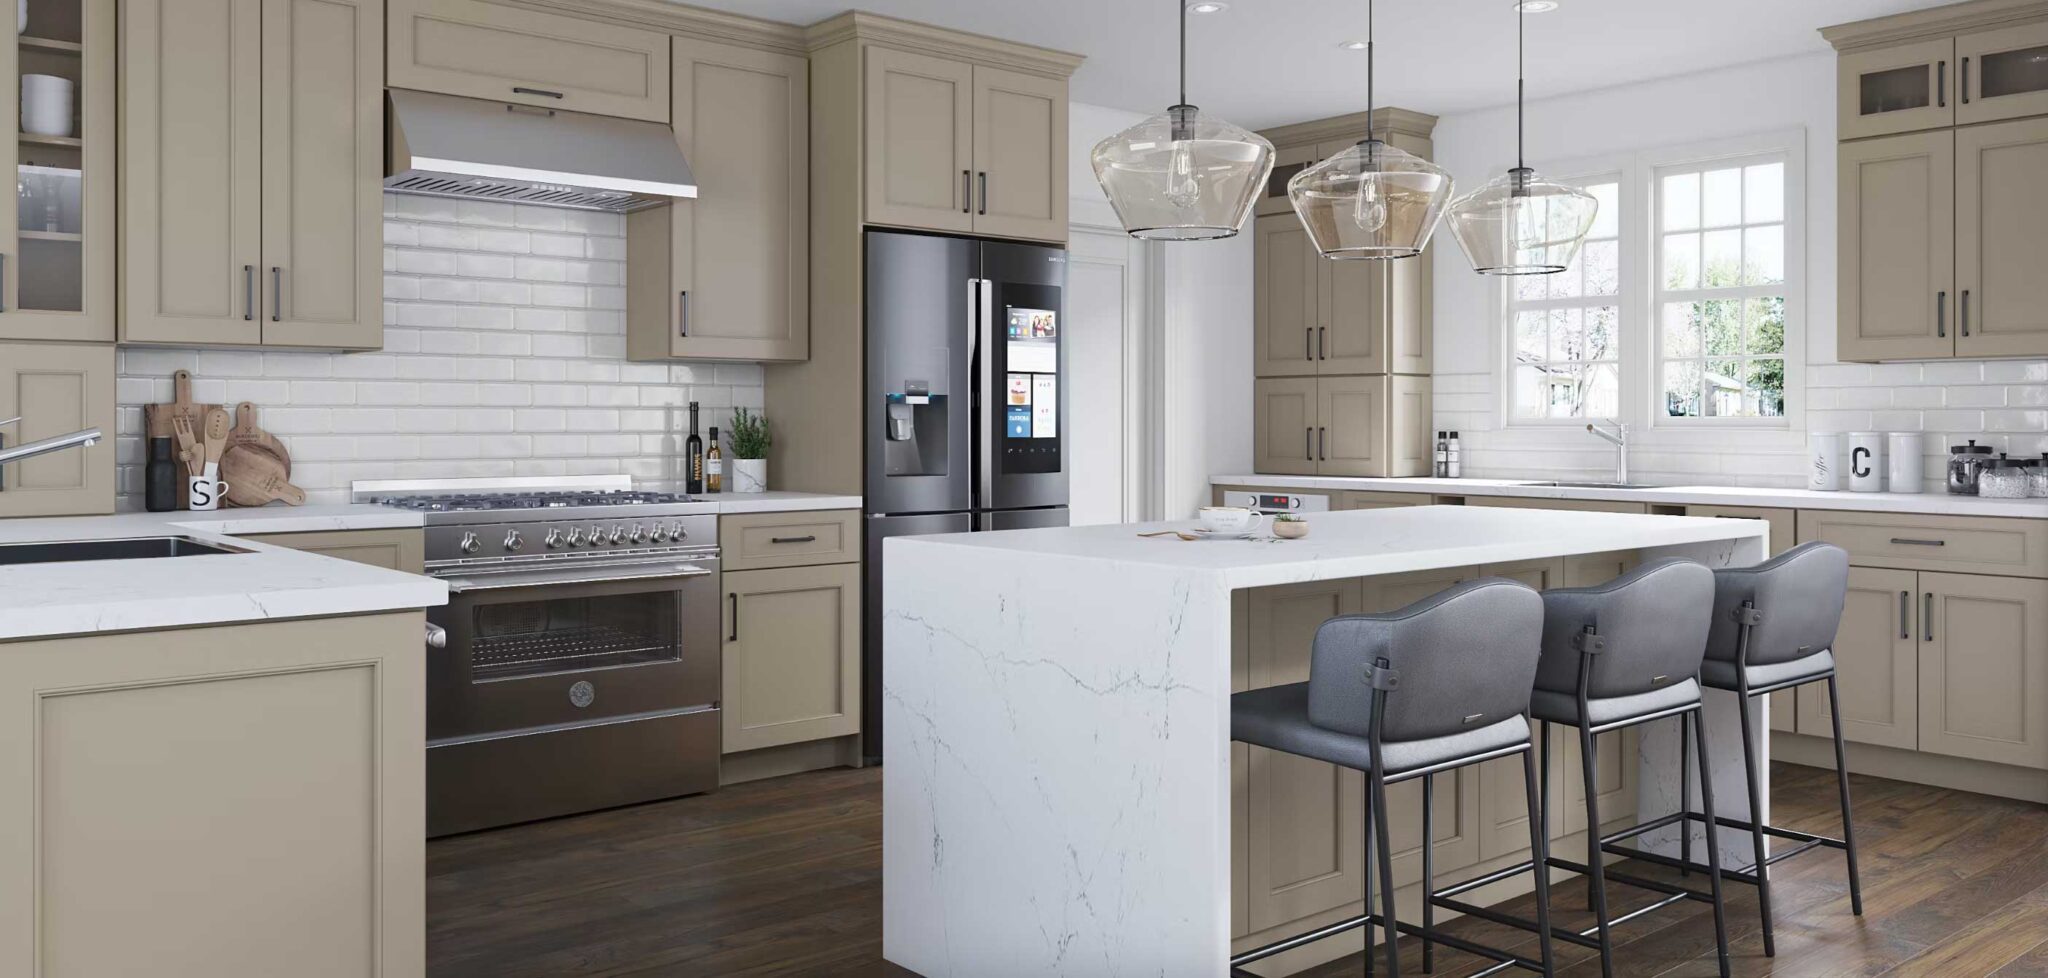 Fabuwood Allure Fusion Oyster - Kitchen Cabinets & Tiles, NJ | Art of